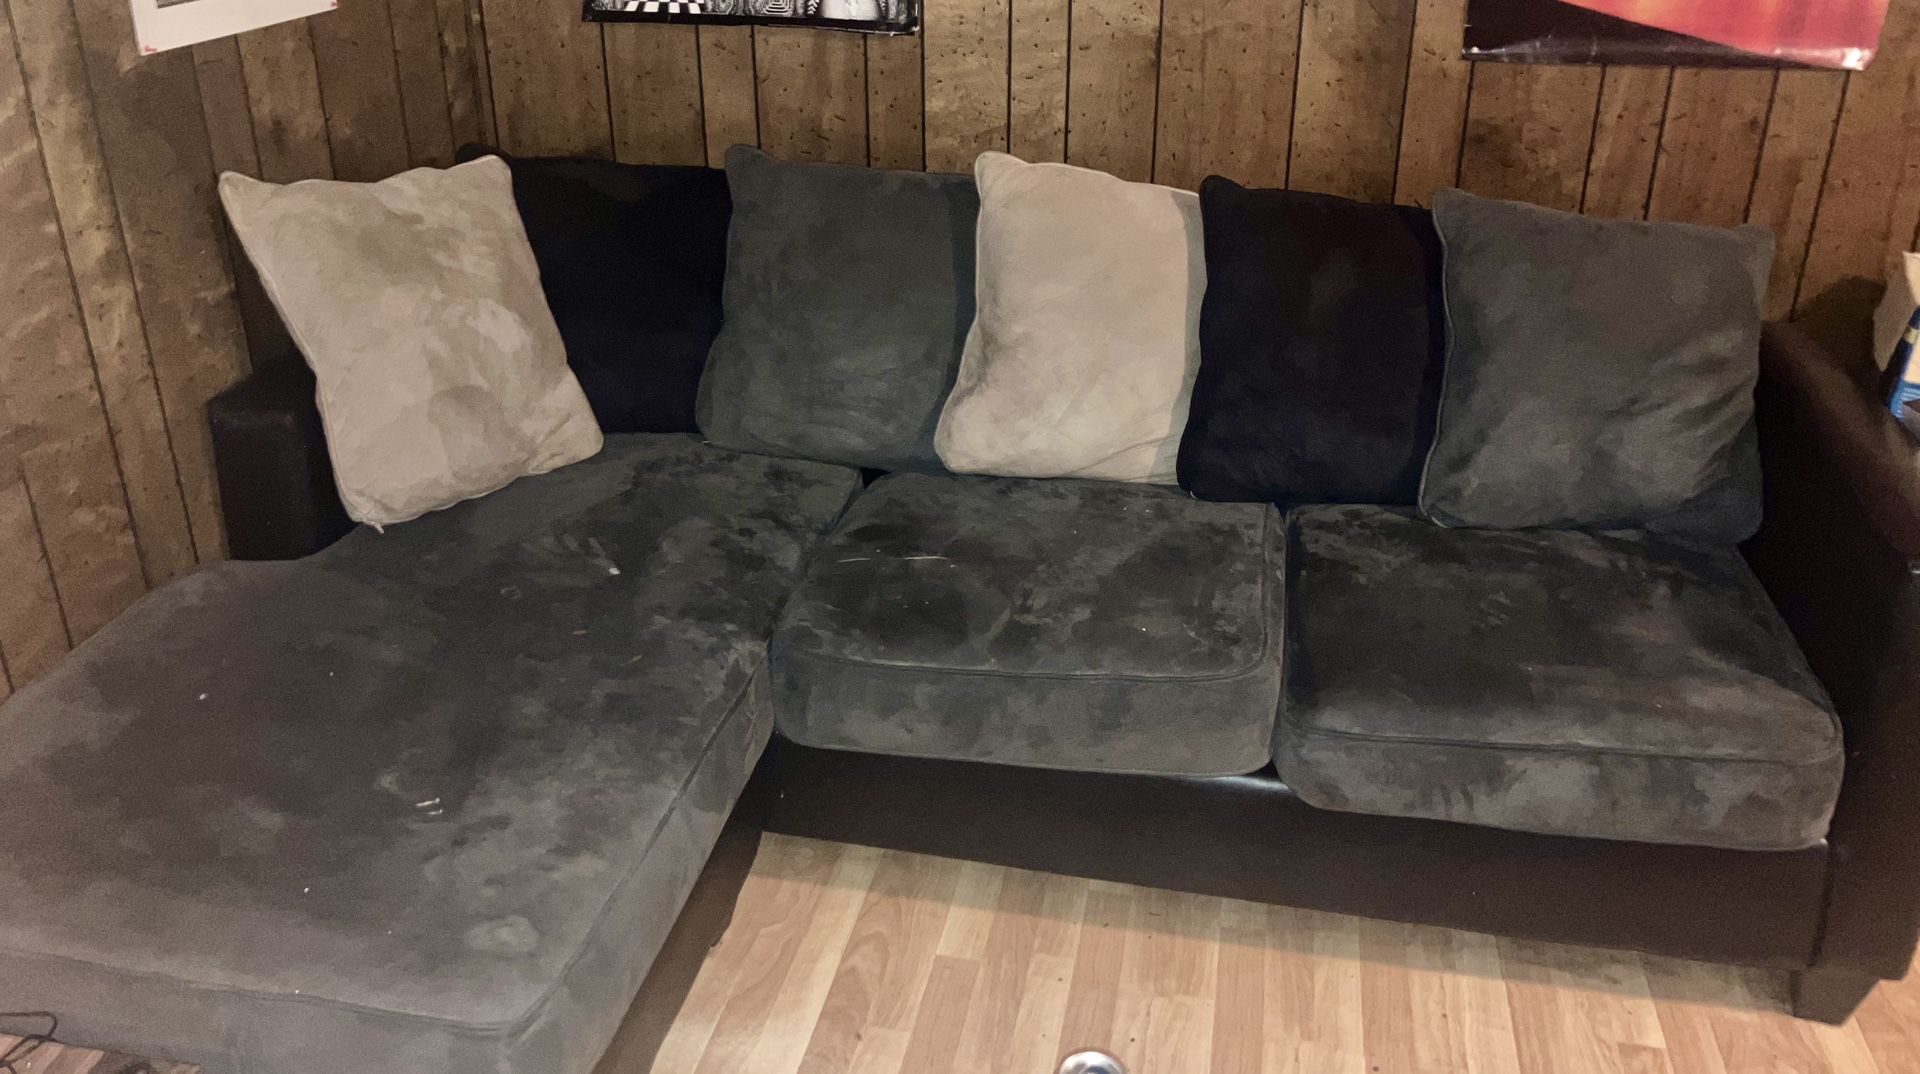 Simulated Black Leather/Grey Suede Couch w/ Chaise 